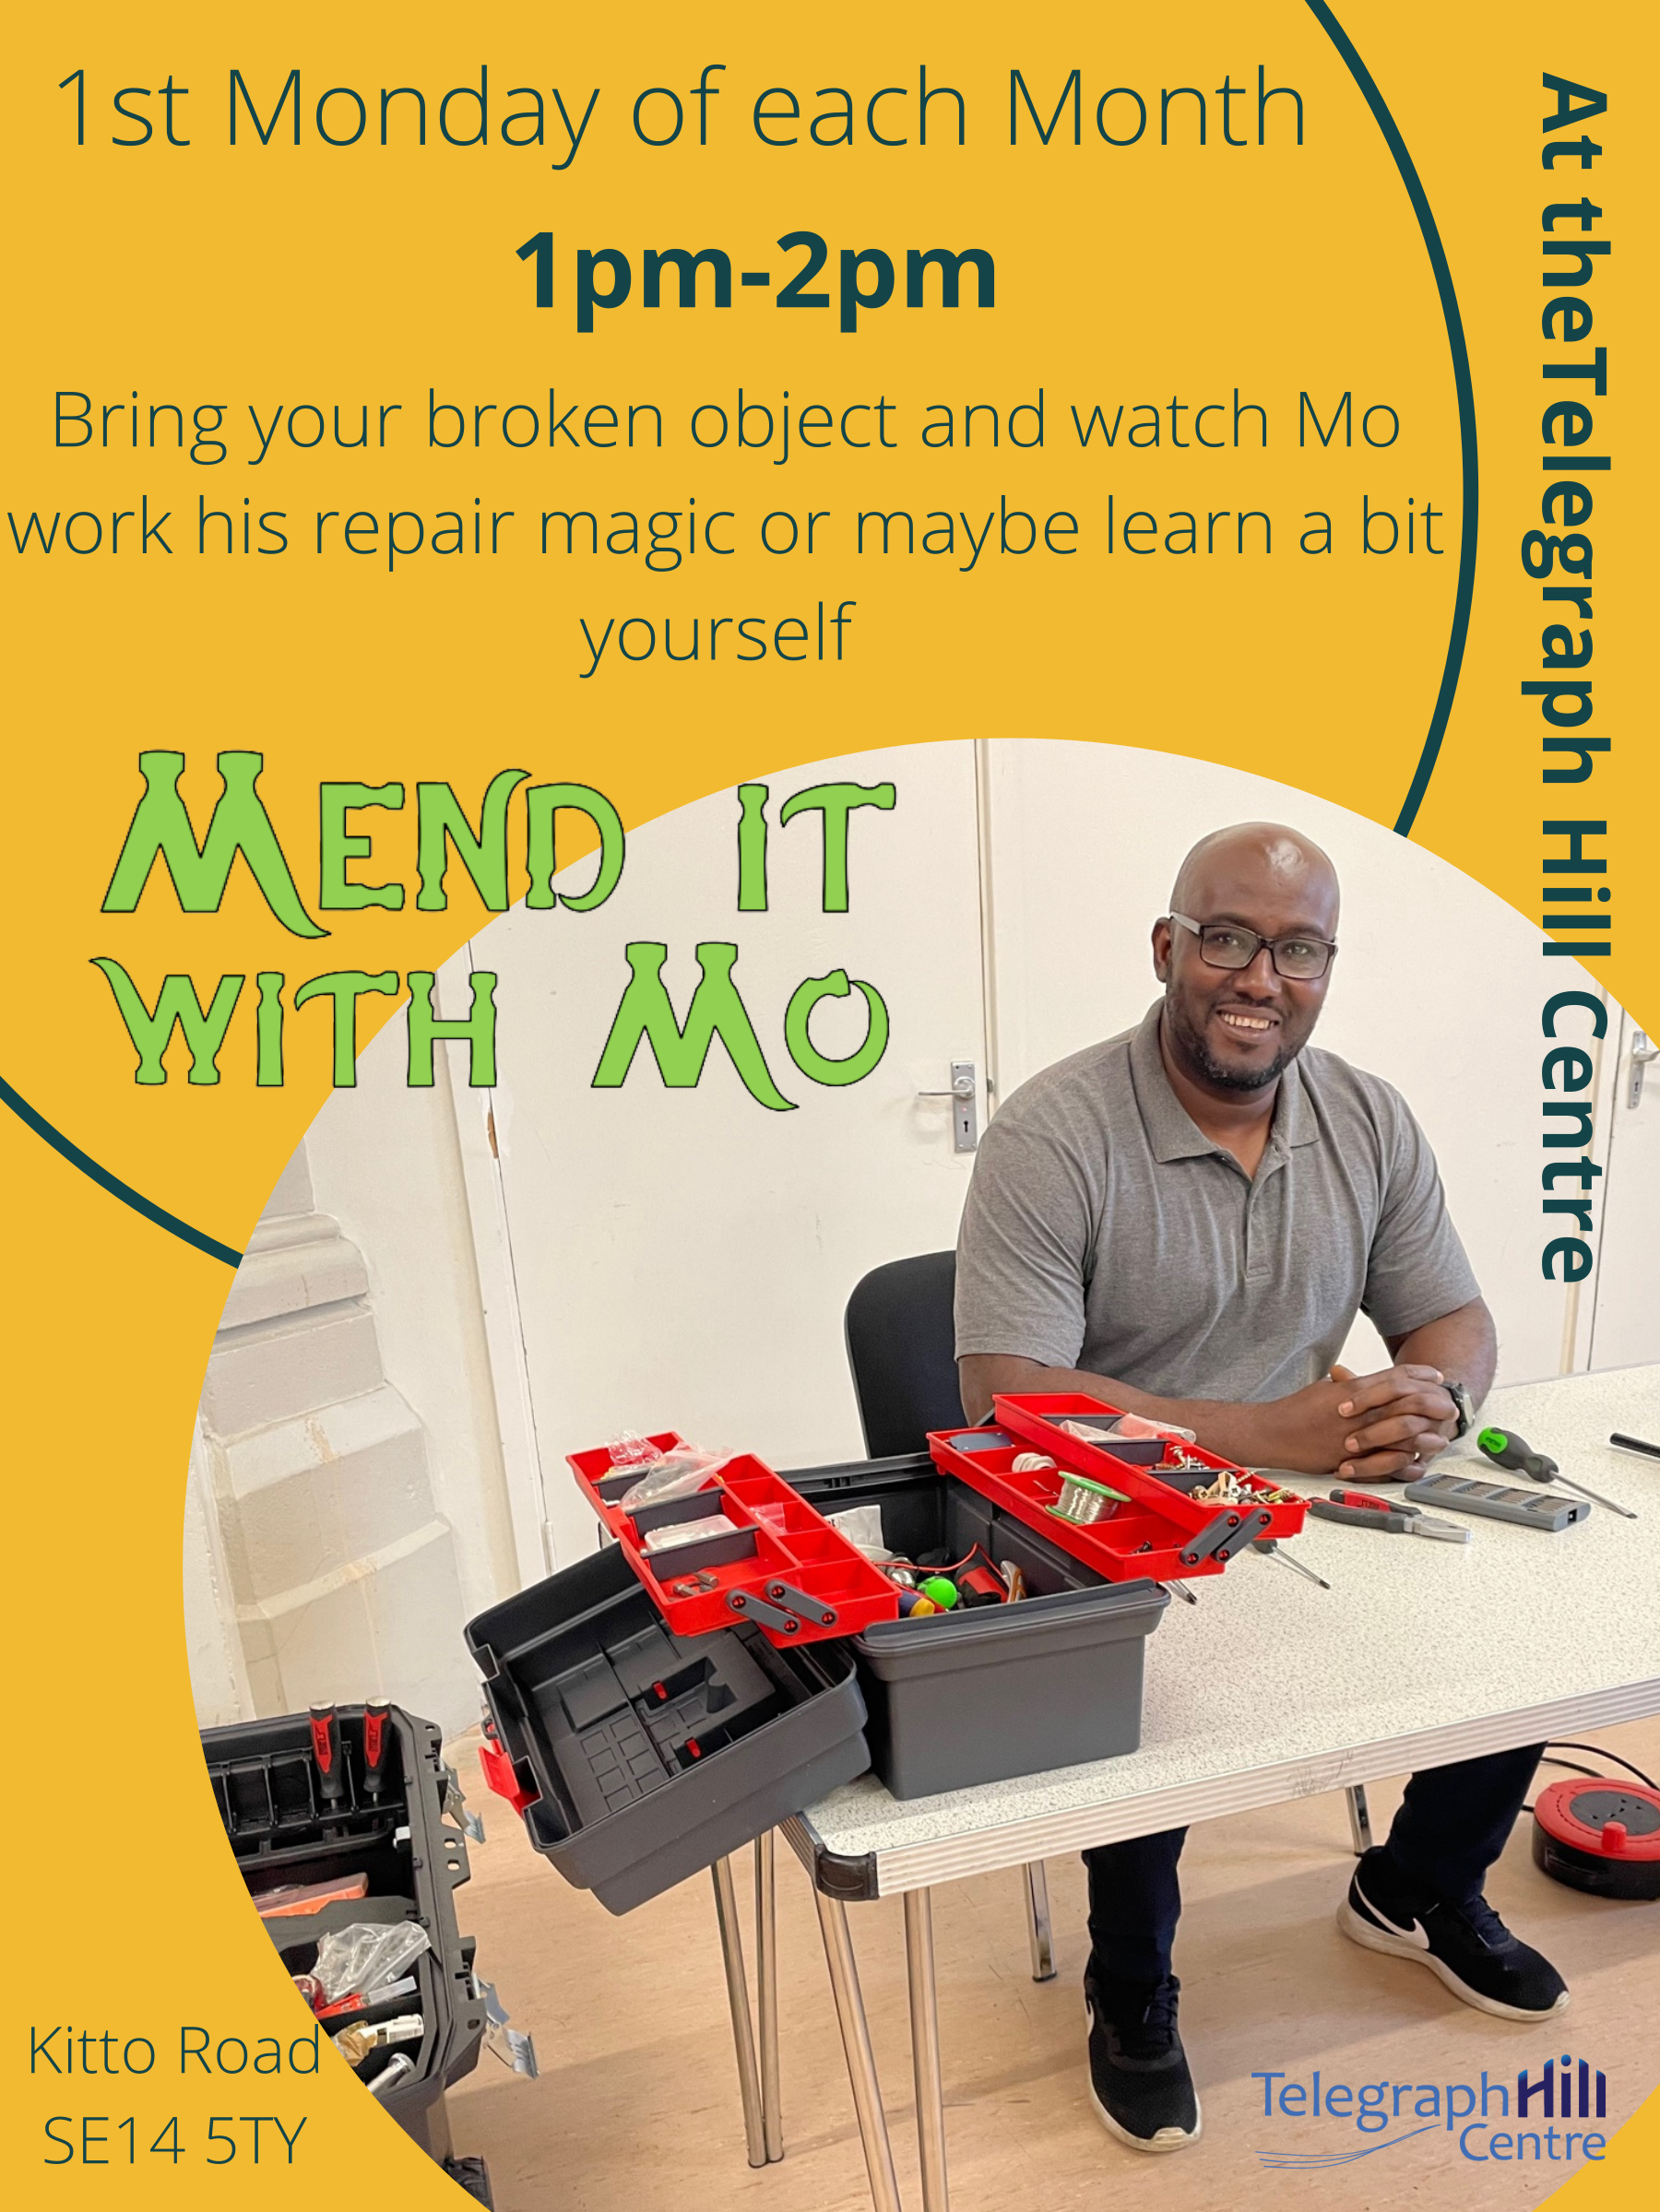 Mend it with Mo